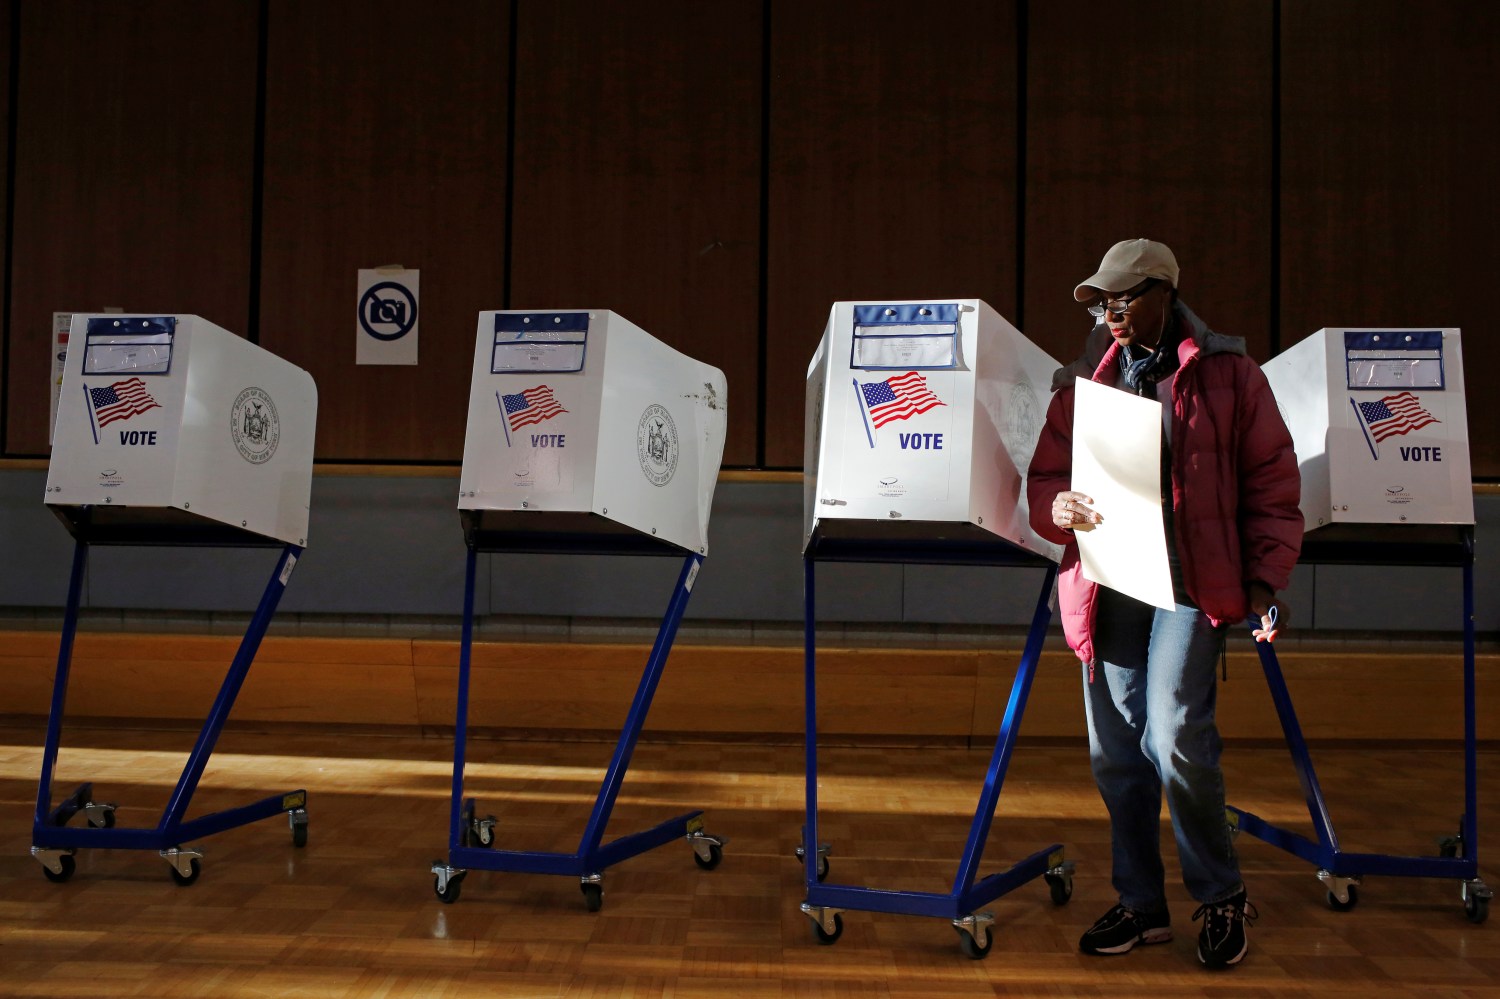 A woman exits the voting booth after filling out her ballot for the U.S presidential election at the James Weldon Johnson Community Center in the East Harlem neighbourhood of Manhattan, New York City, U.S. November 8, 2016. REUTERS/Andrew Kelly - RTX2SIHQ